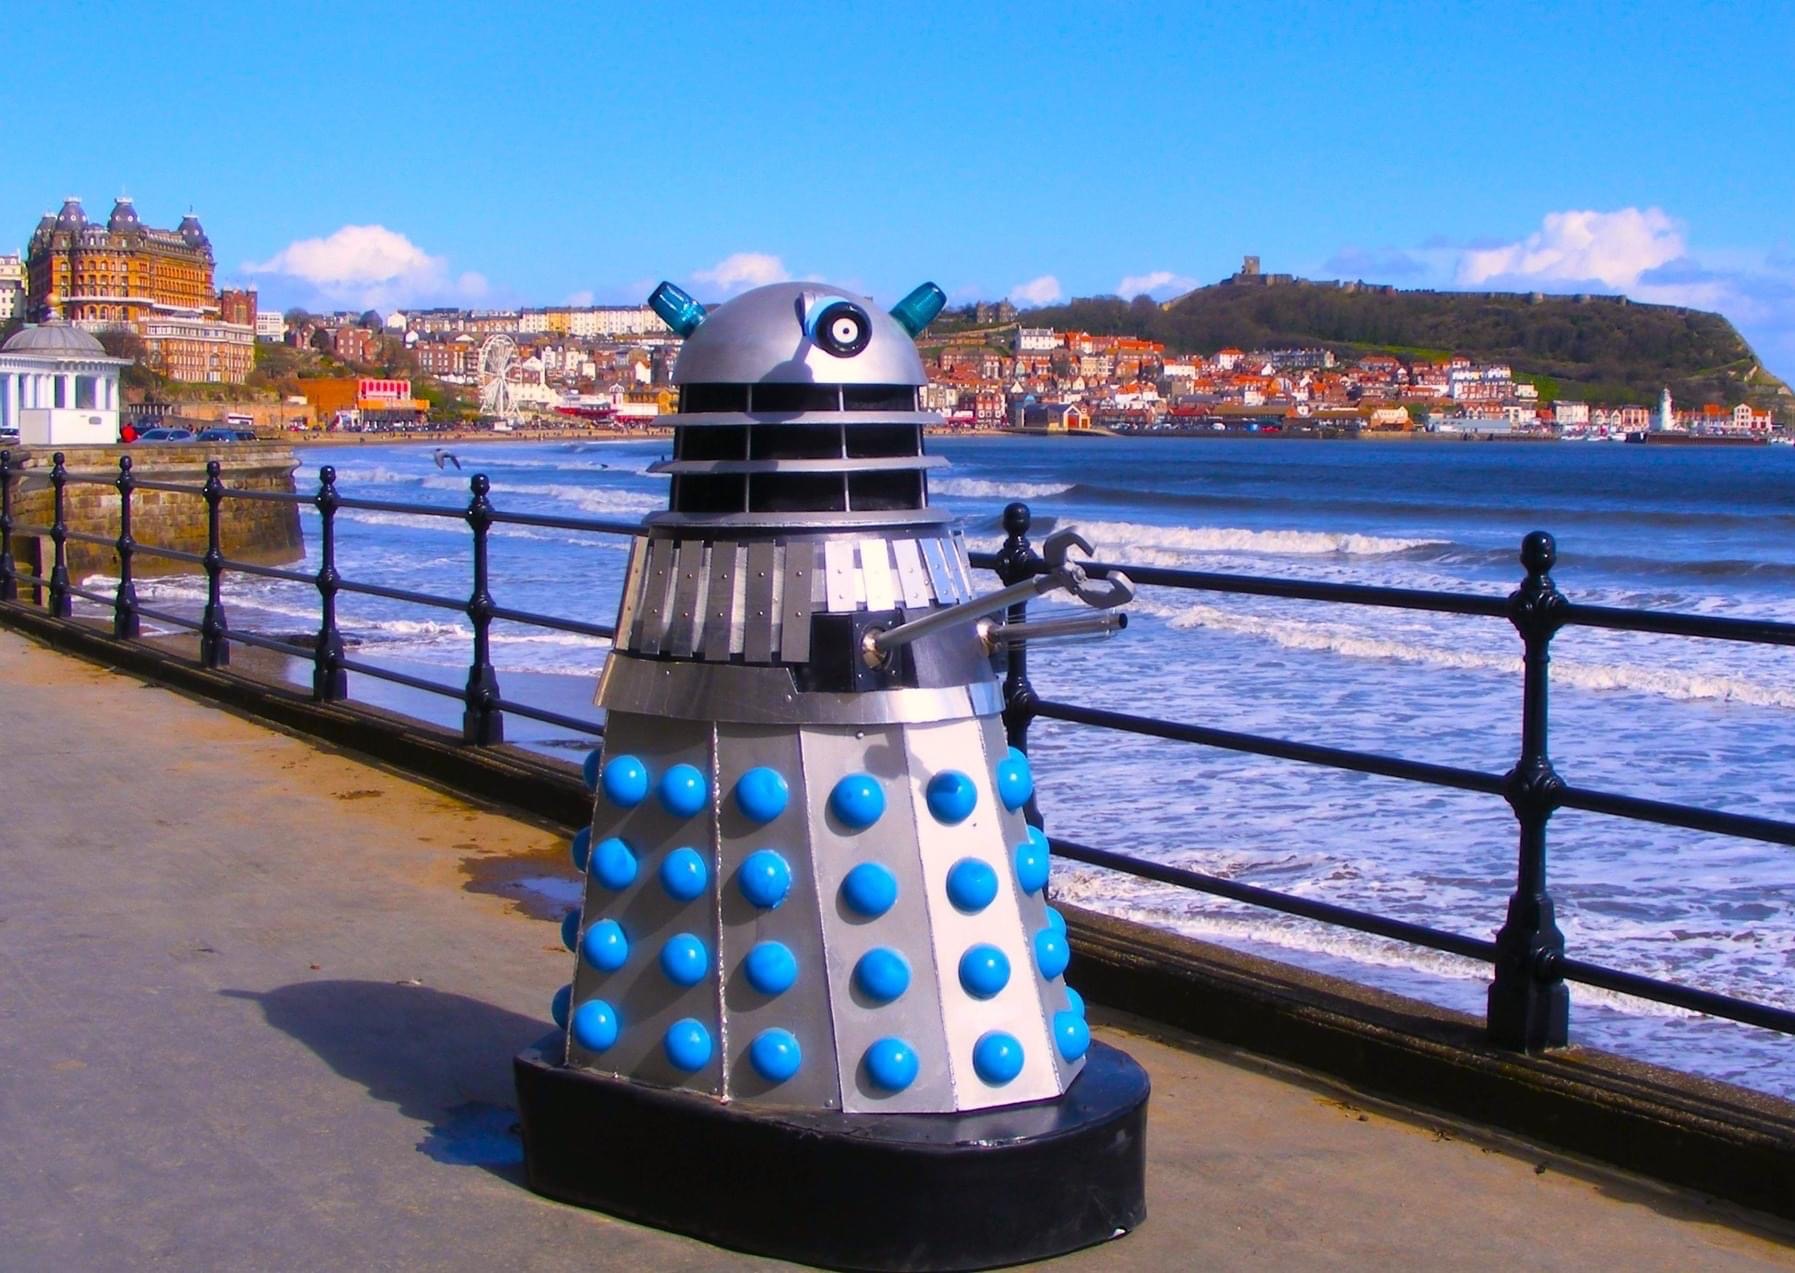 A Dalek on Scarborough seafront